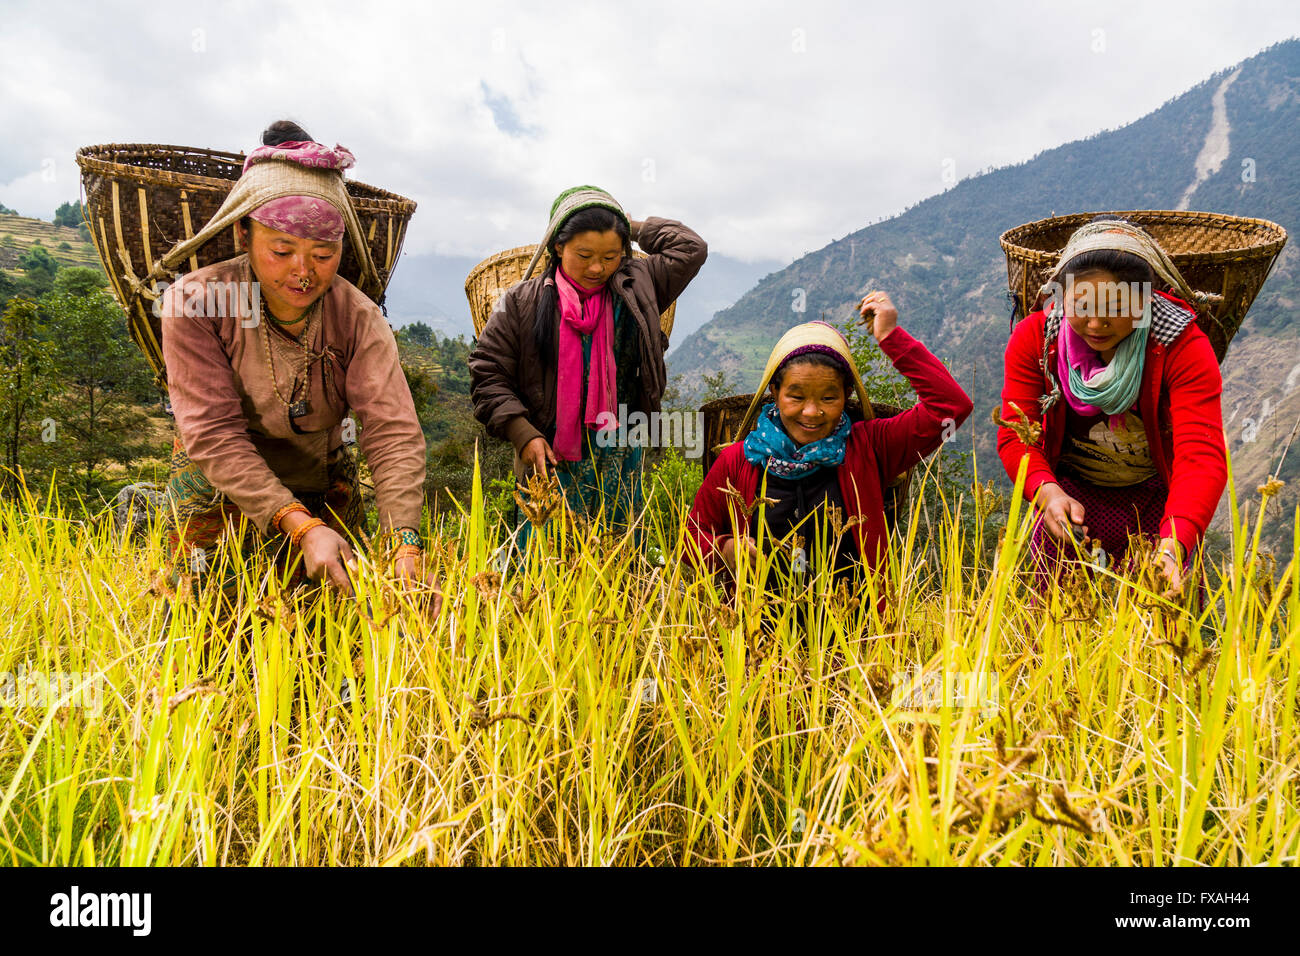 Women with baskets on their back are harvesting millet by hand, Jubhing, Solo Khumbu, Nepal Stock Photo